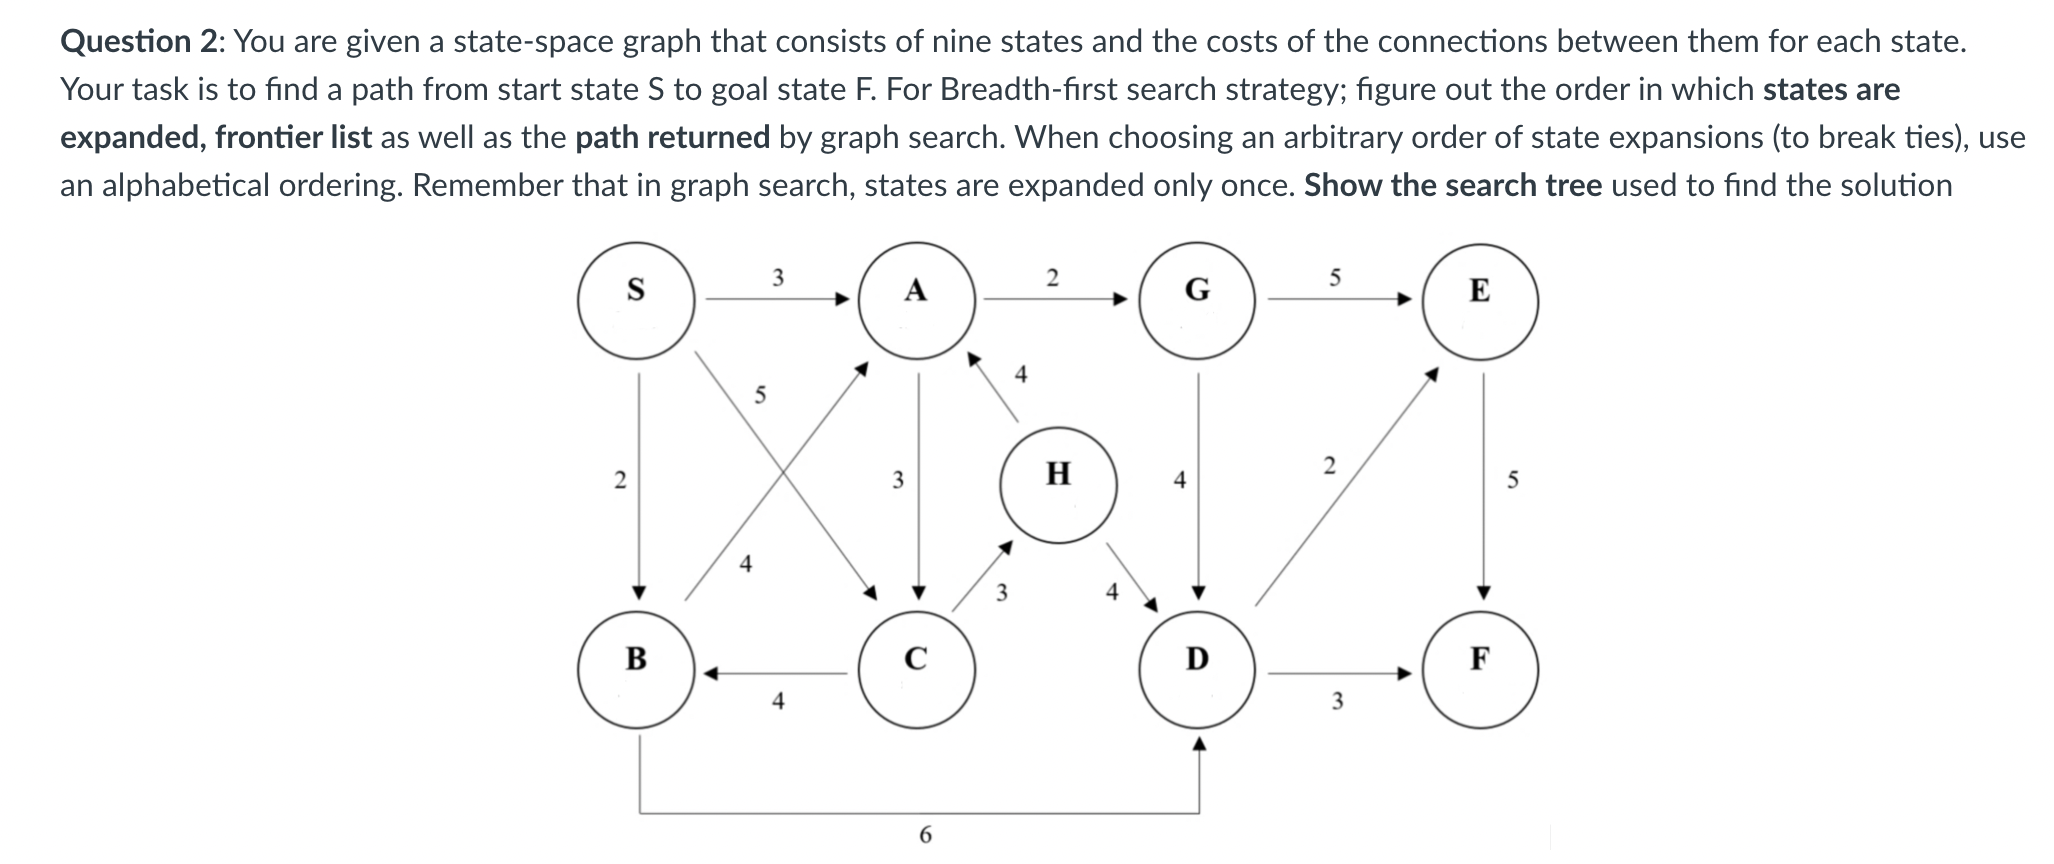 Question 2: You are given a state-space graph that consists of nine states and the costs of the connections